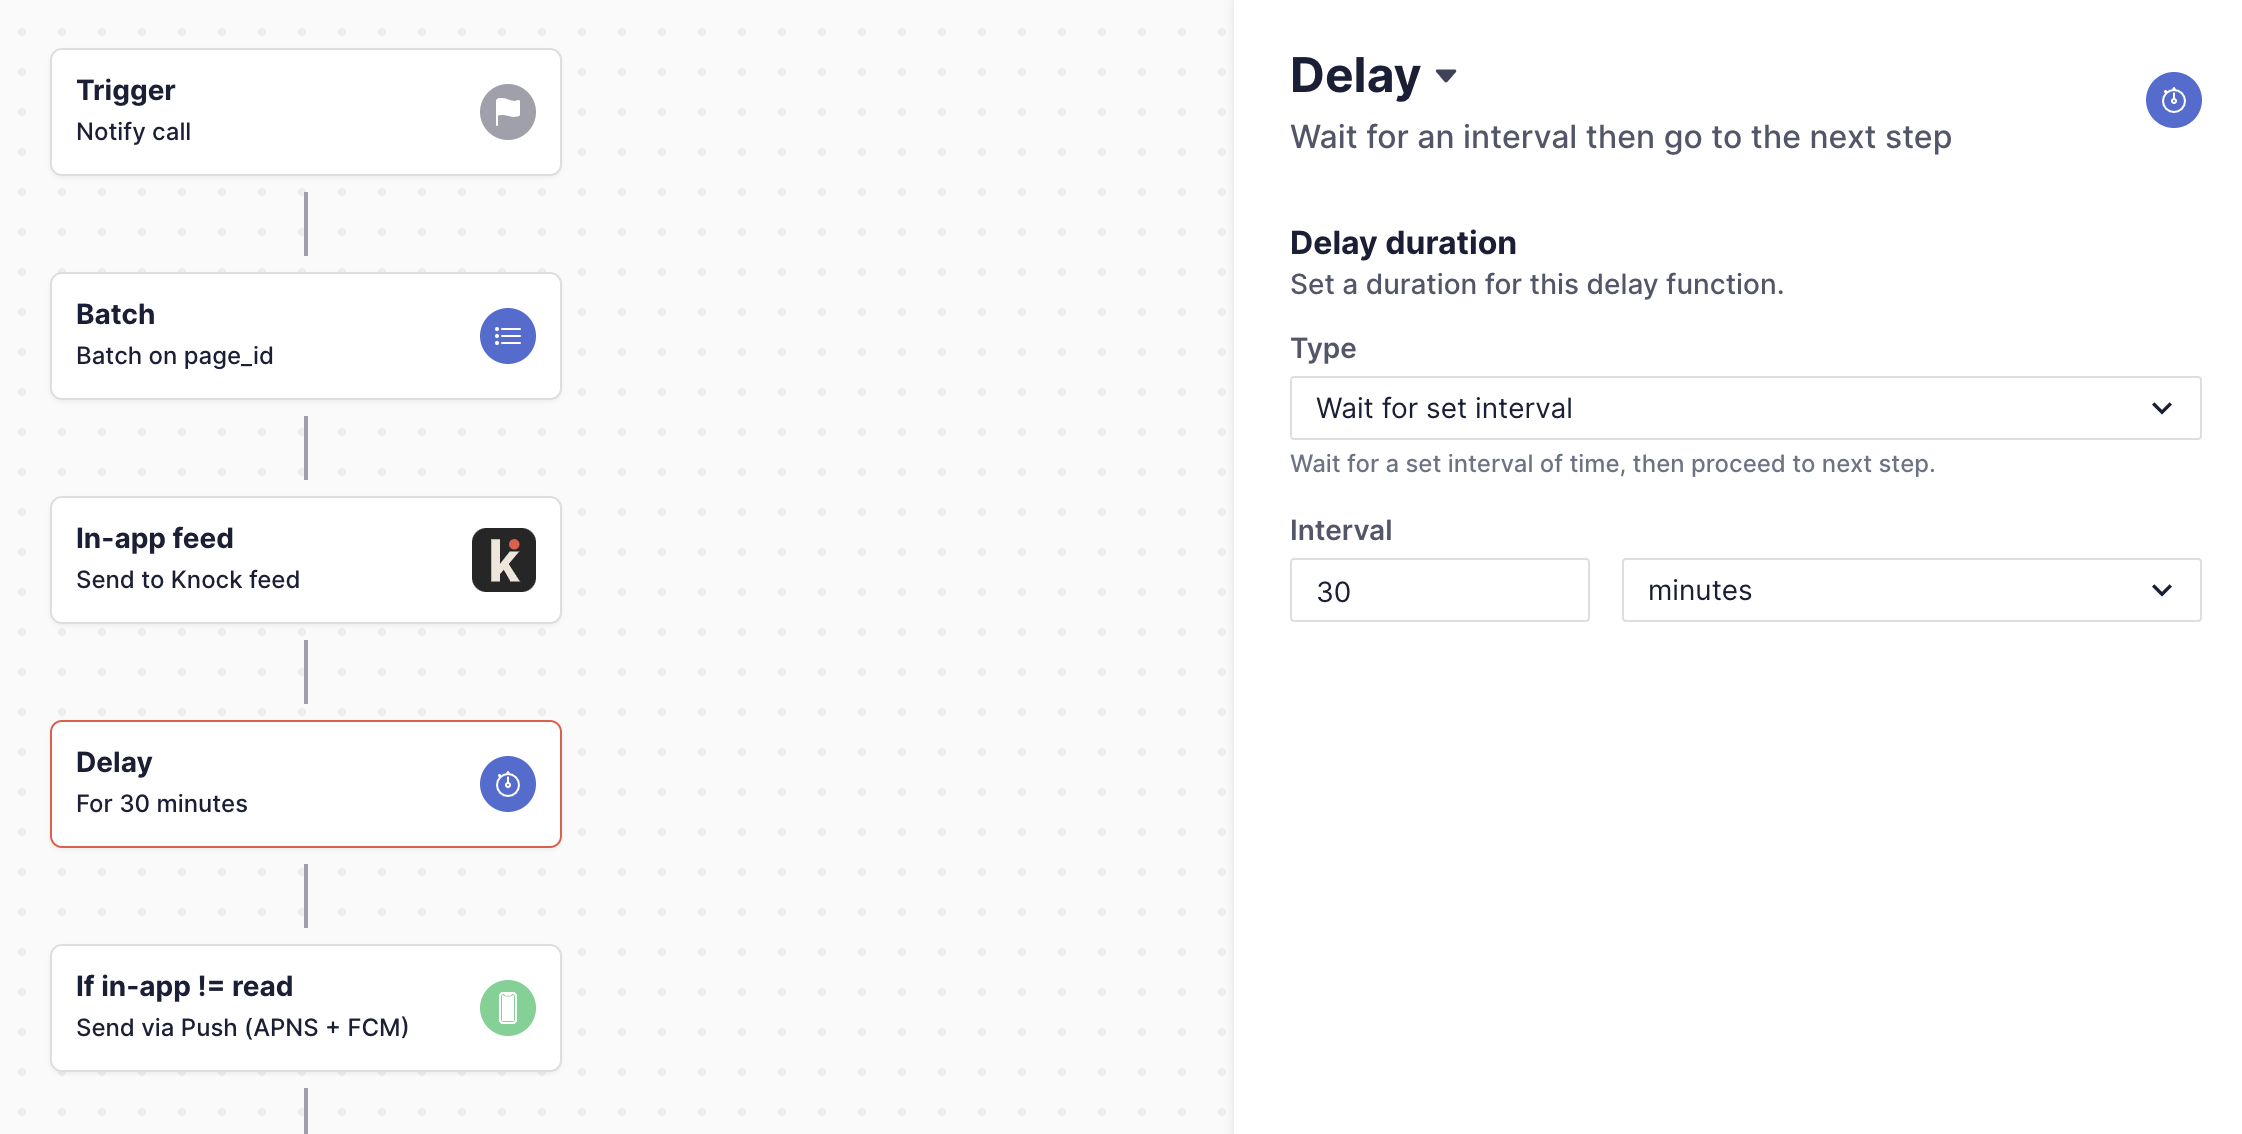 A workflow using the "wait for set interval" delay function to wait to see if a user's read an in-app message before notifying via email.